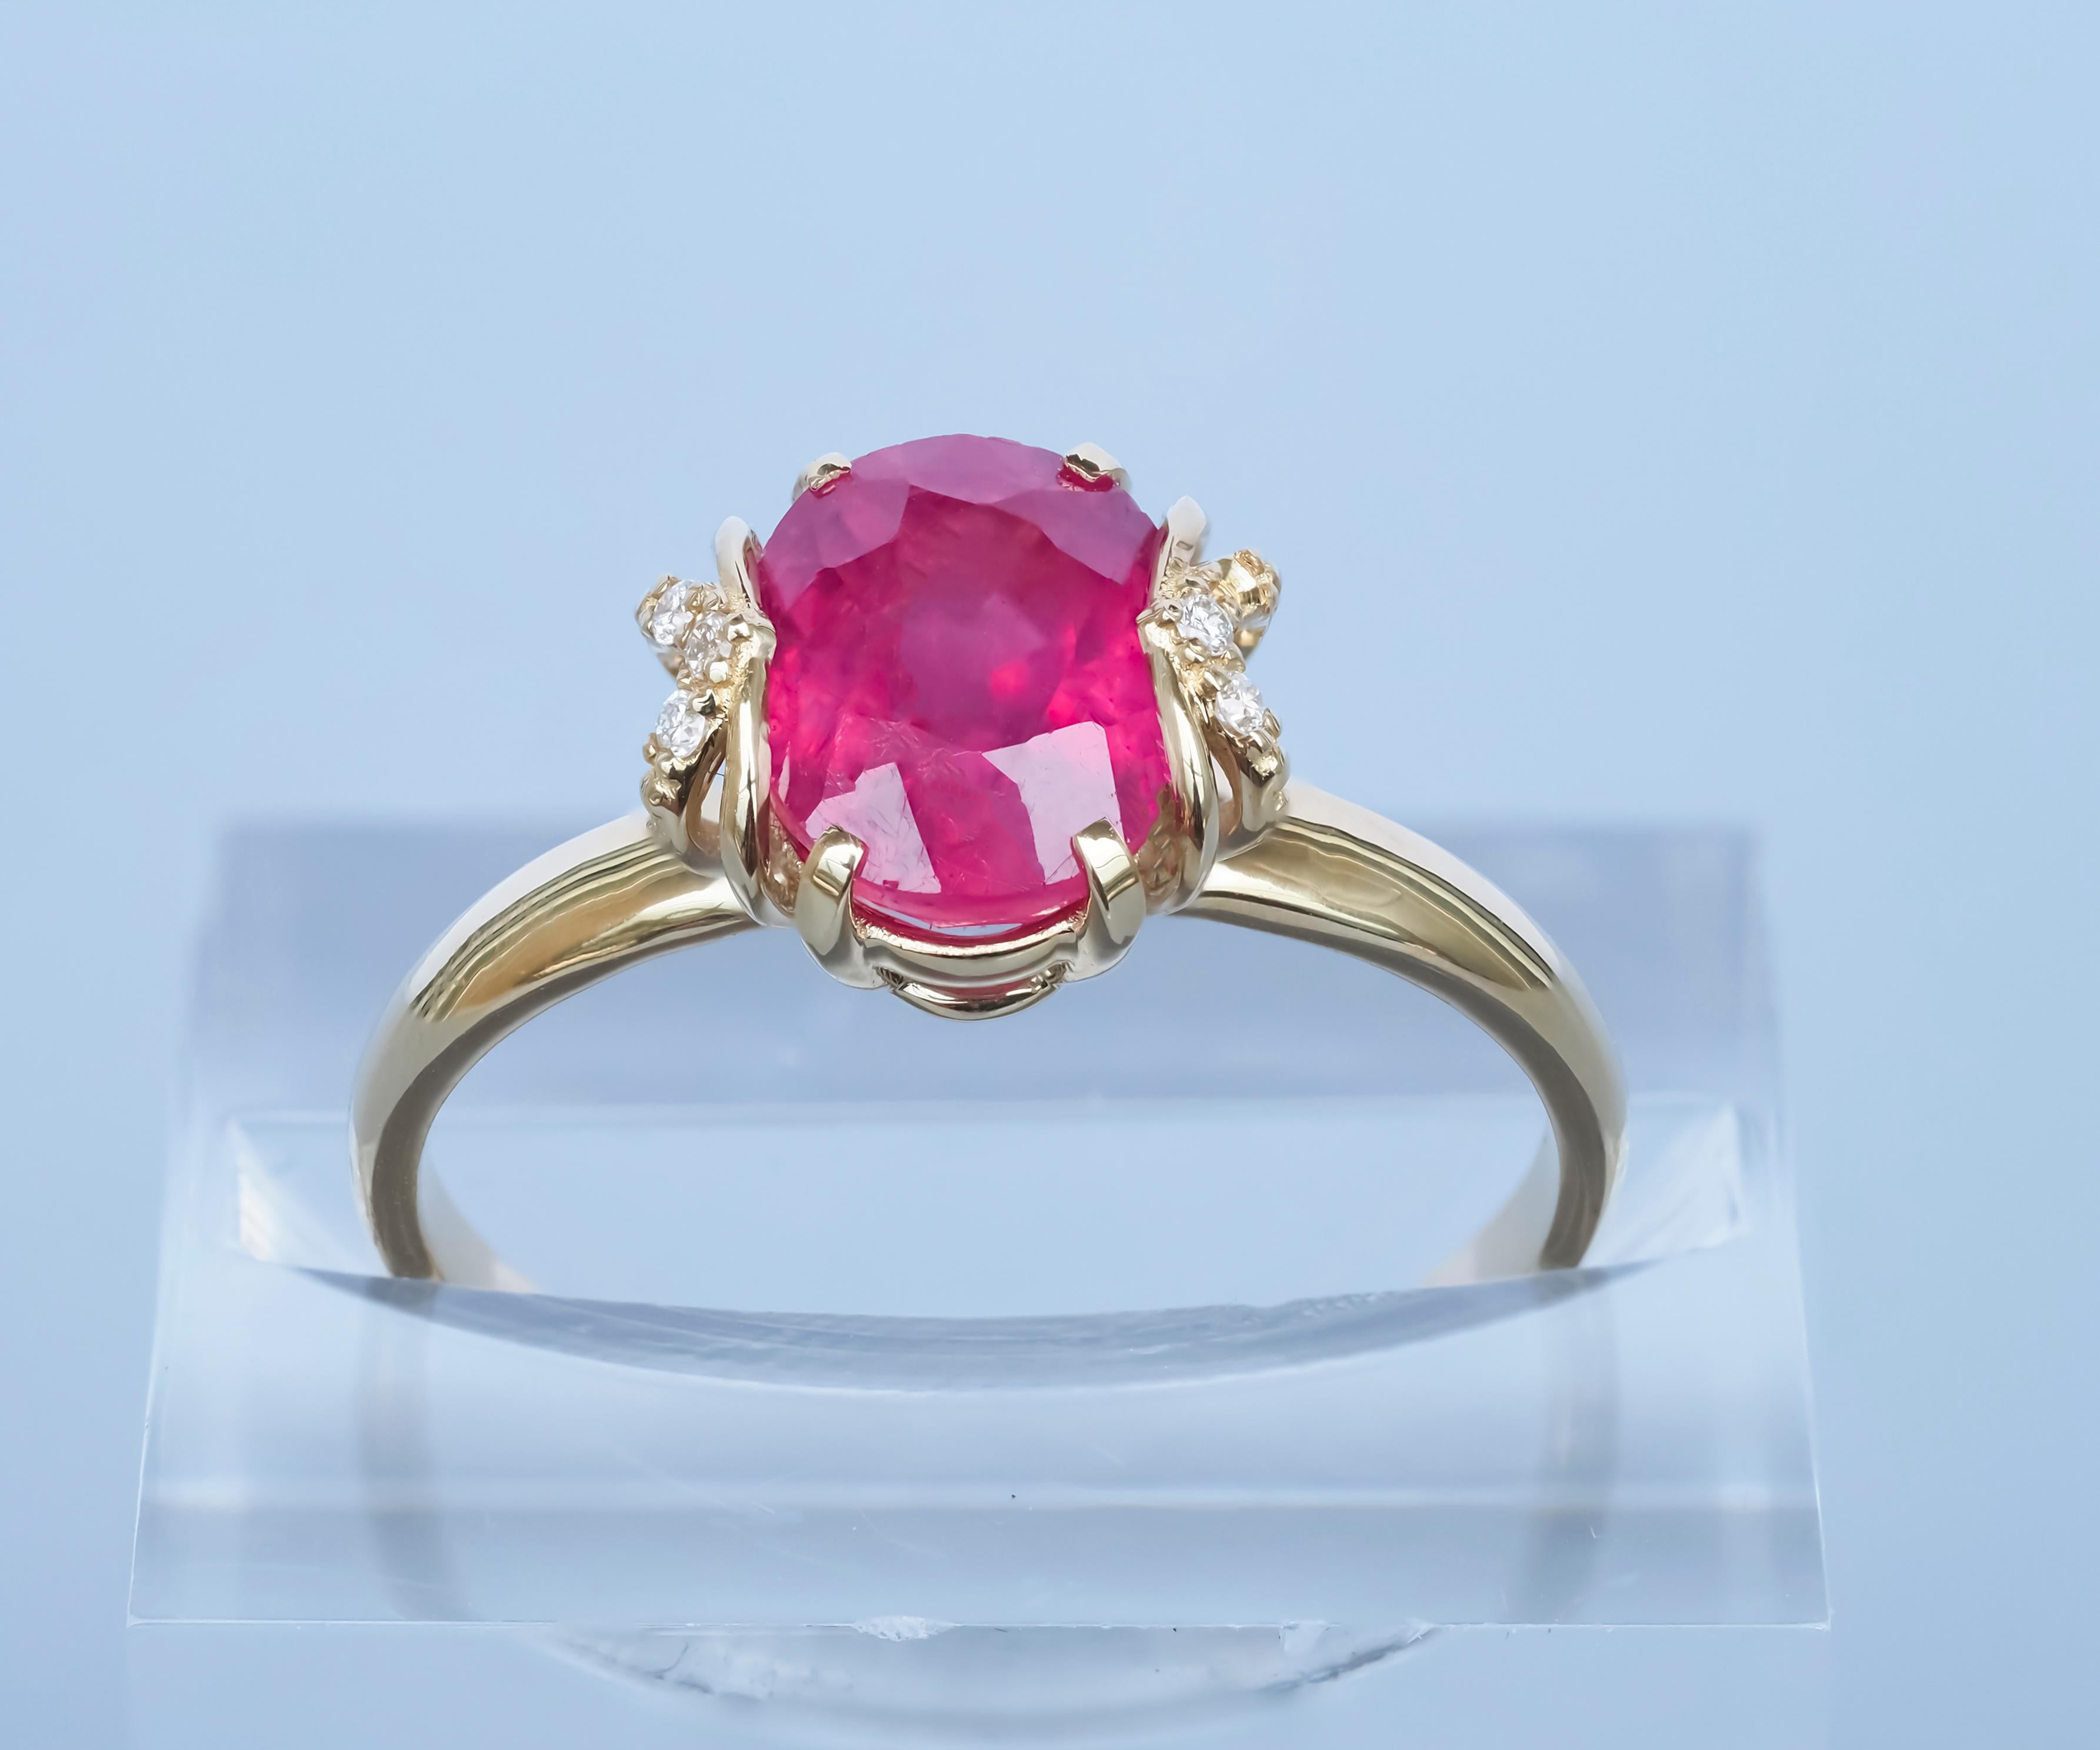 For Sale:  14 Karat Gold Ring with Ruby and Diamonds. Oval ruby ring! 5